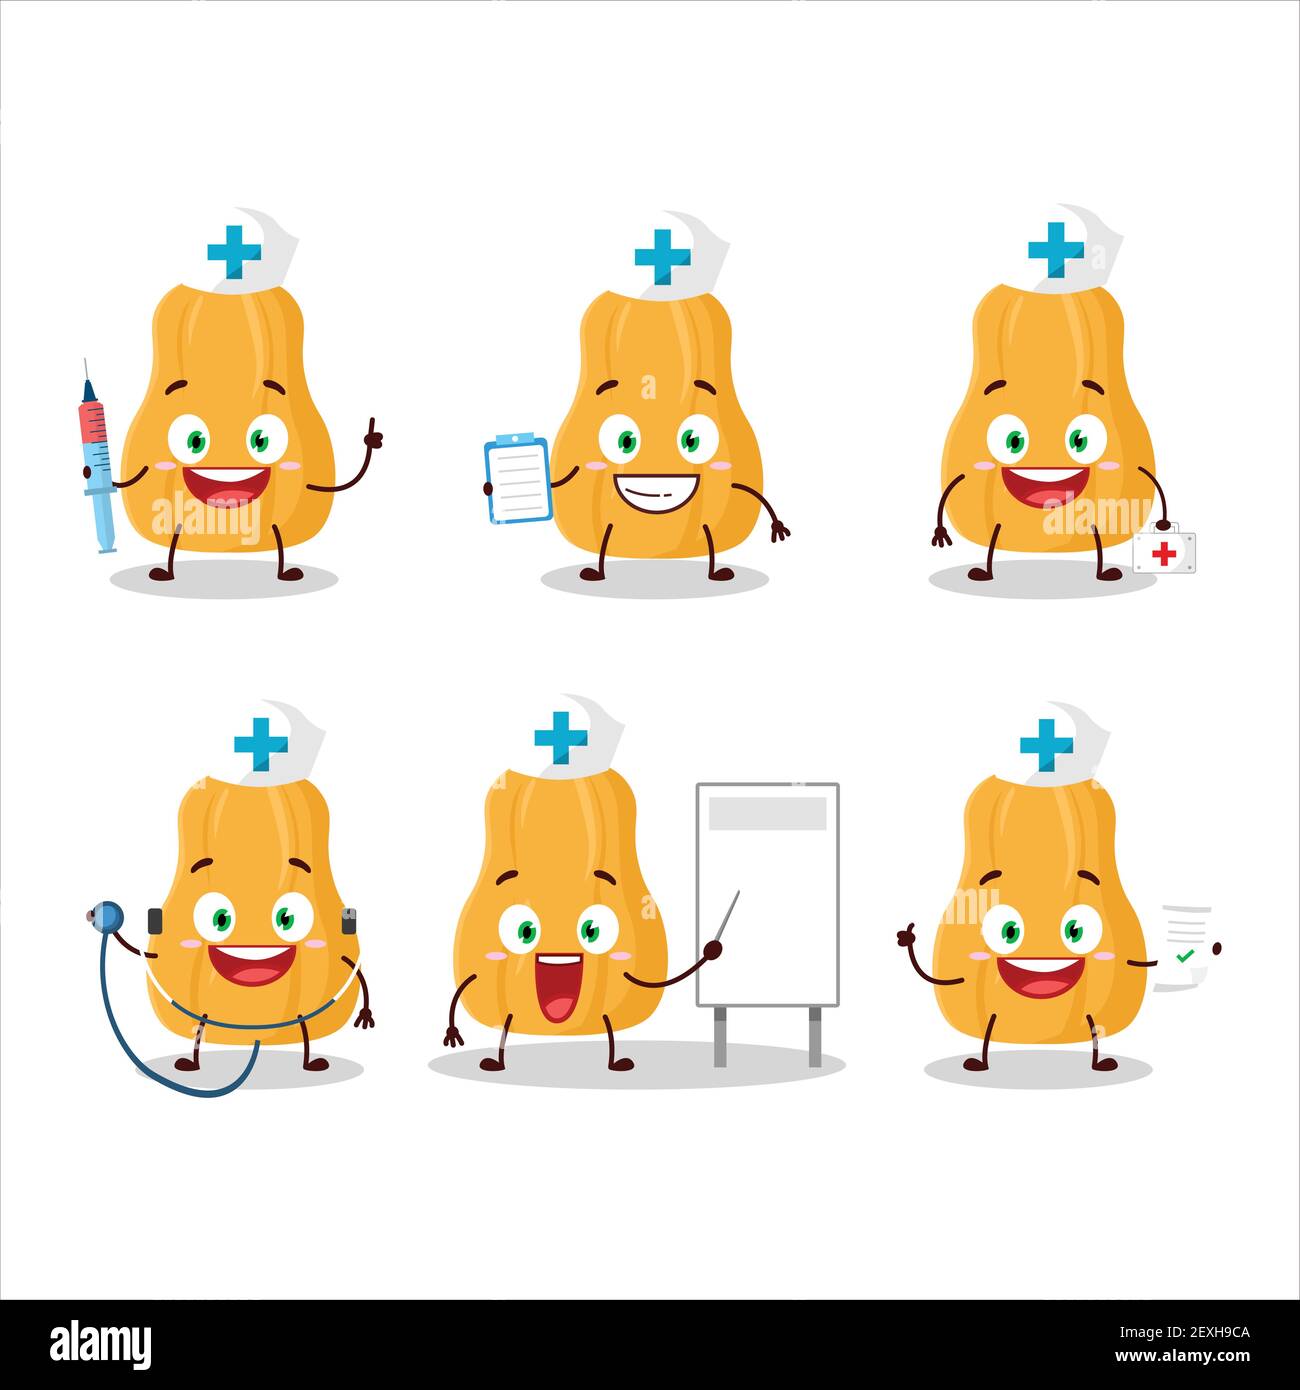 https://c8.alamy.com/comp/2EXH9CA/doctor-profession-emoticon-with-butternut-squash-cartoon-character-vector-illustration-2EXH9CA.jpg